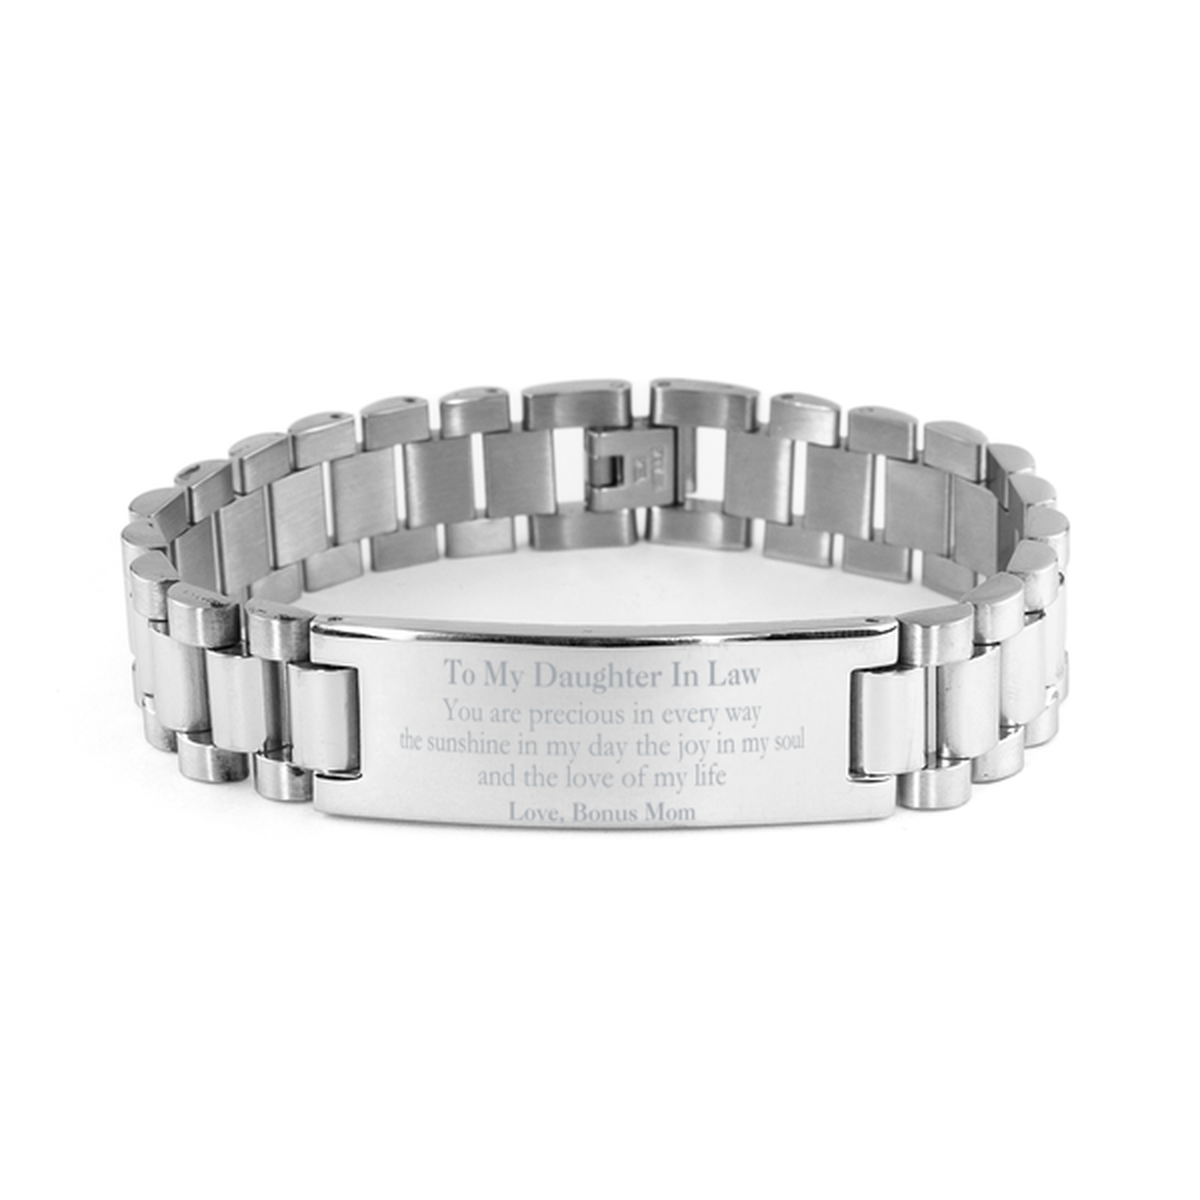 Graduation Gifts for Daughter In Law Ladder Stainless Steel Bracelet Present from Bonus Mom, Christmas Daughter In Law Birthday Gifts Daughter In Law You are precious in every way the sunshine in my day. Love, Bonus Mom